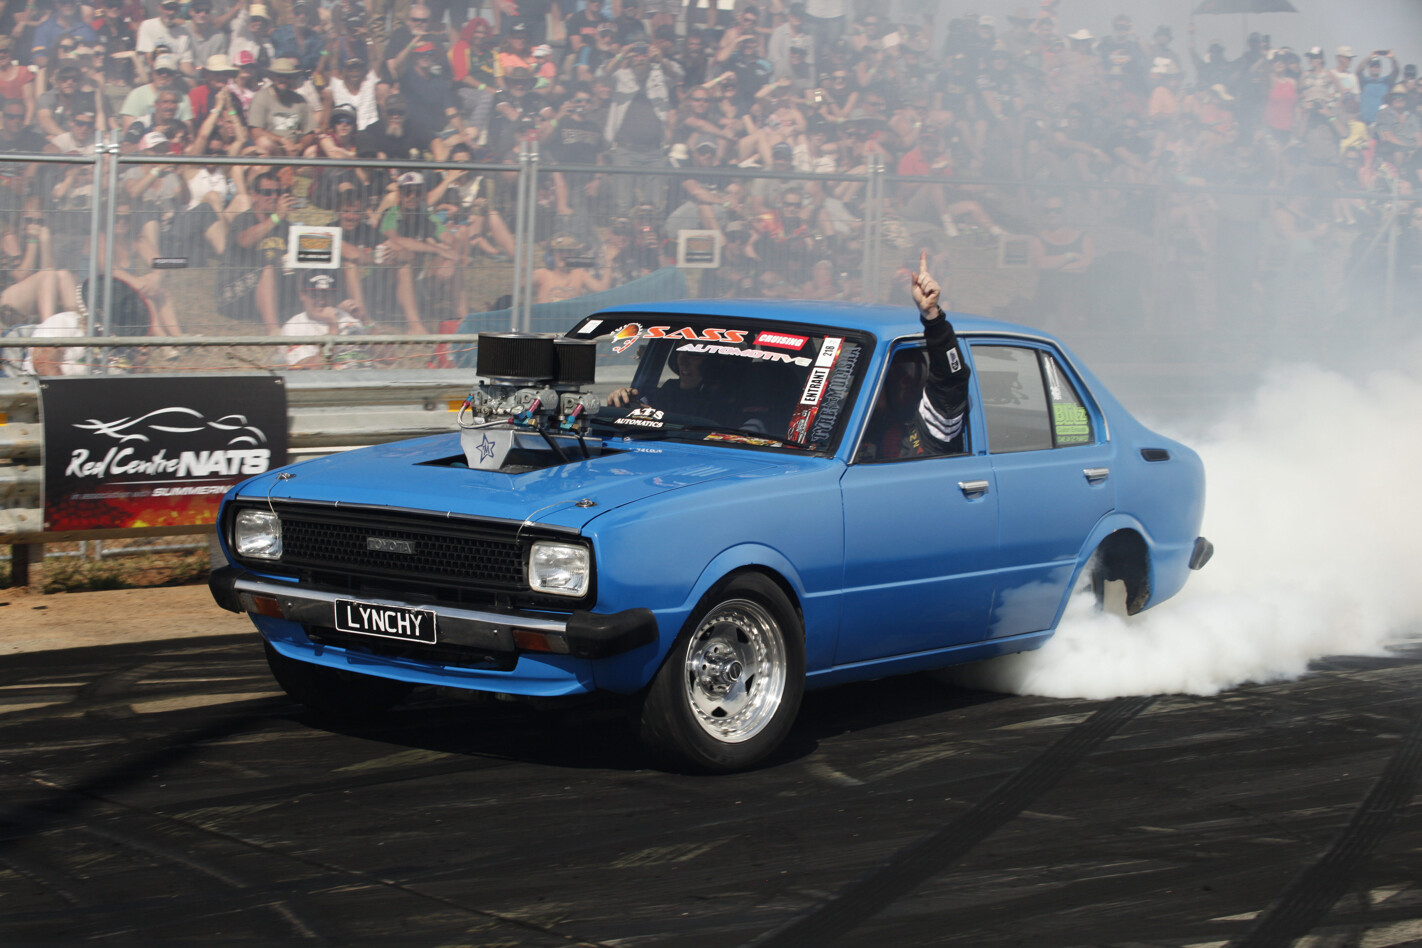 VIDEO: LYNCHY’S AWESOME RED CENTRENATS BURNOUT